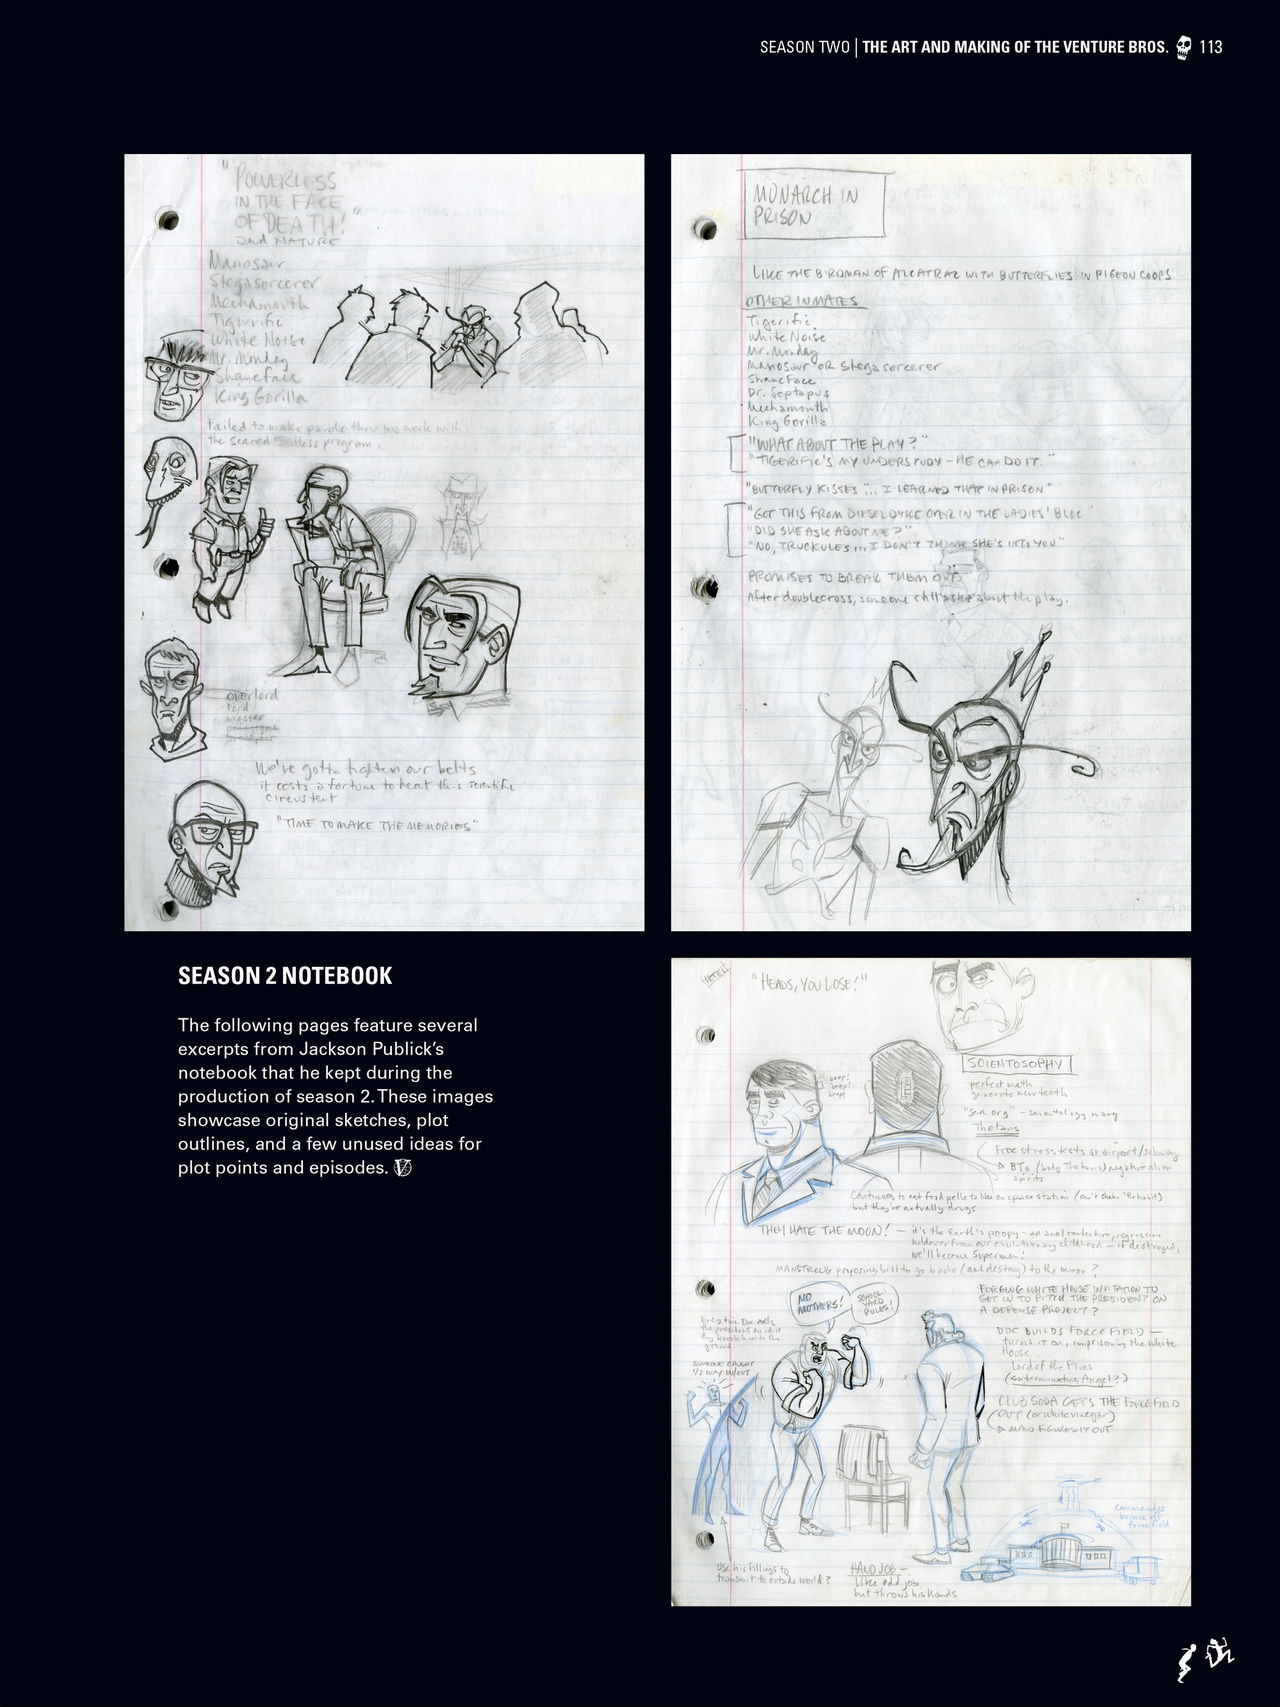 Go Team Venture! - The Art and Making of the Venture Bros 112